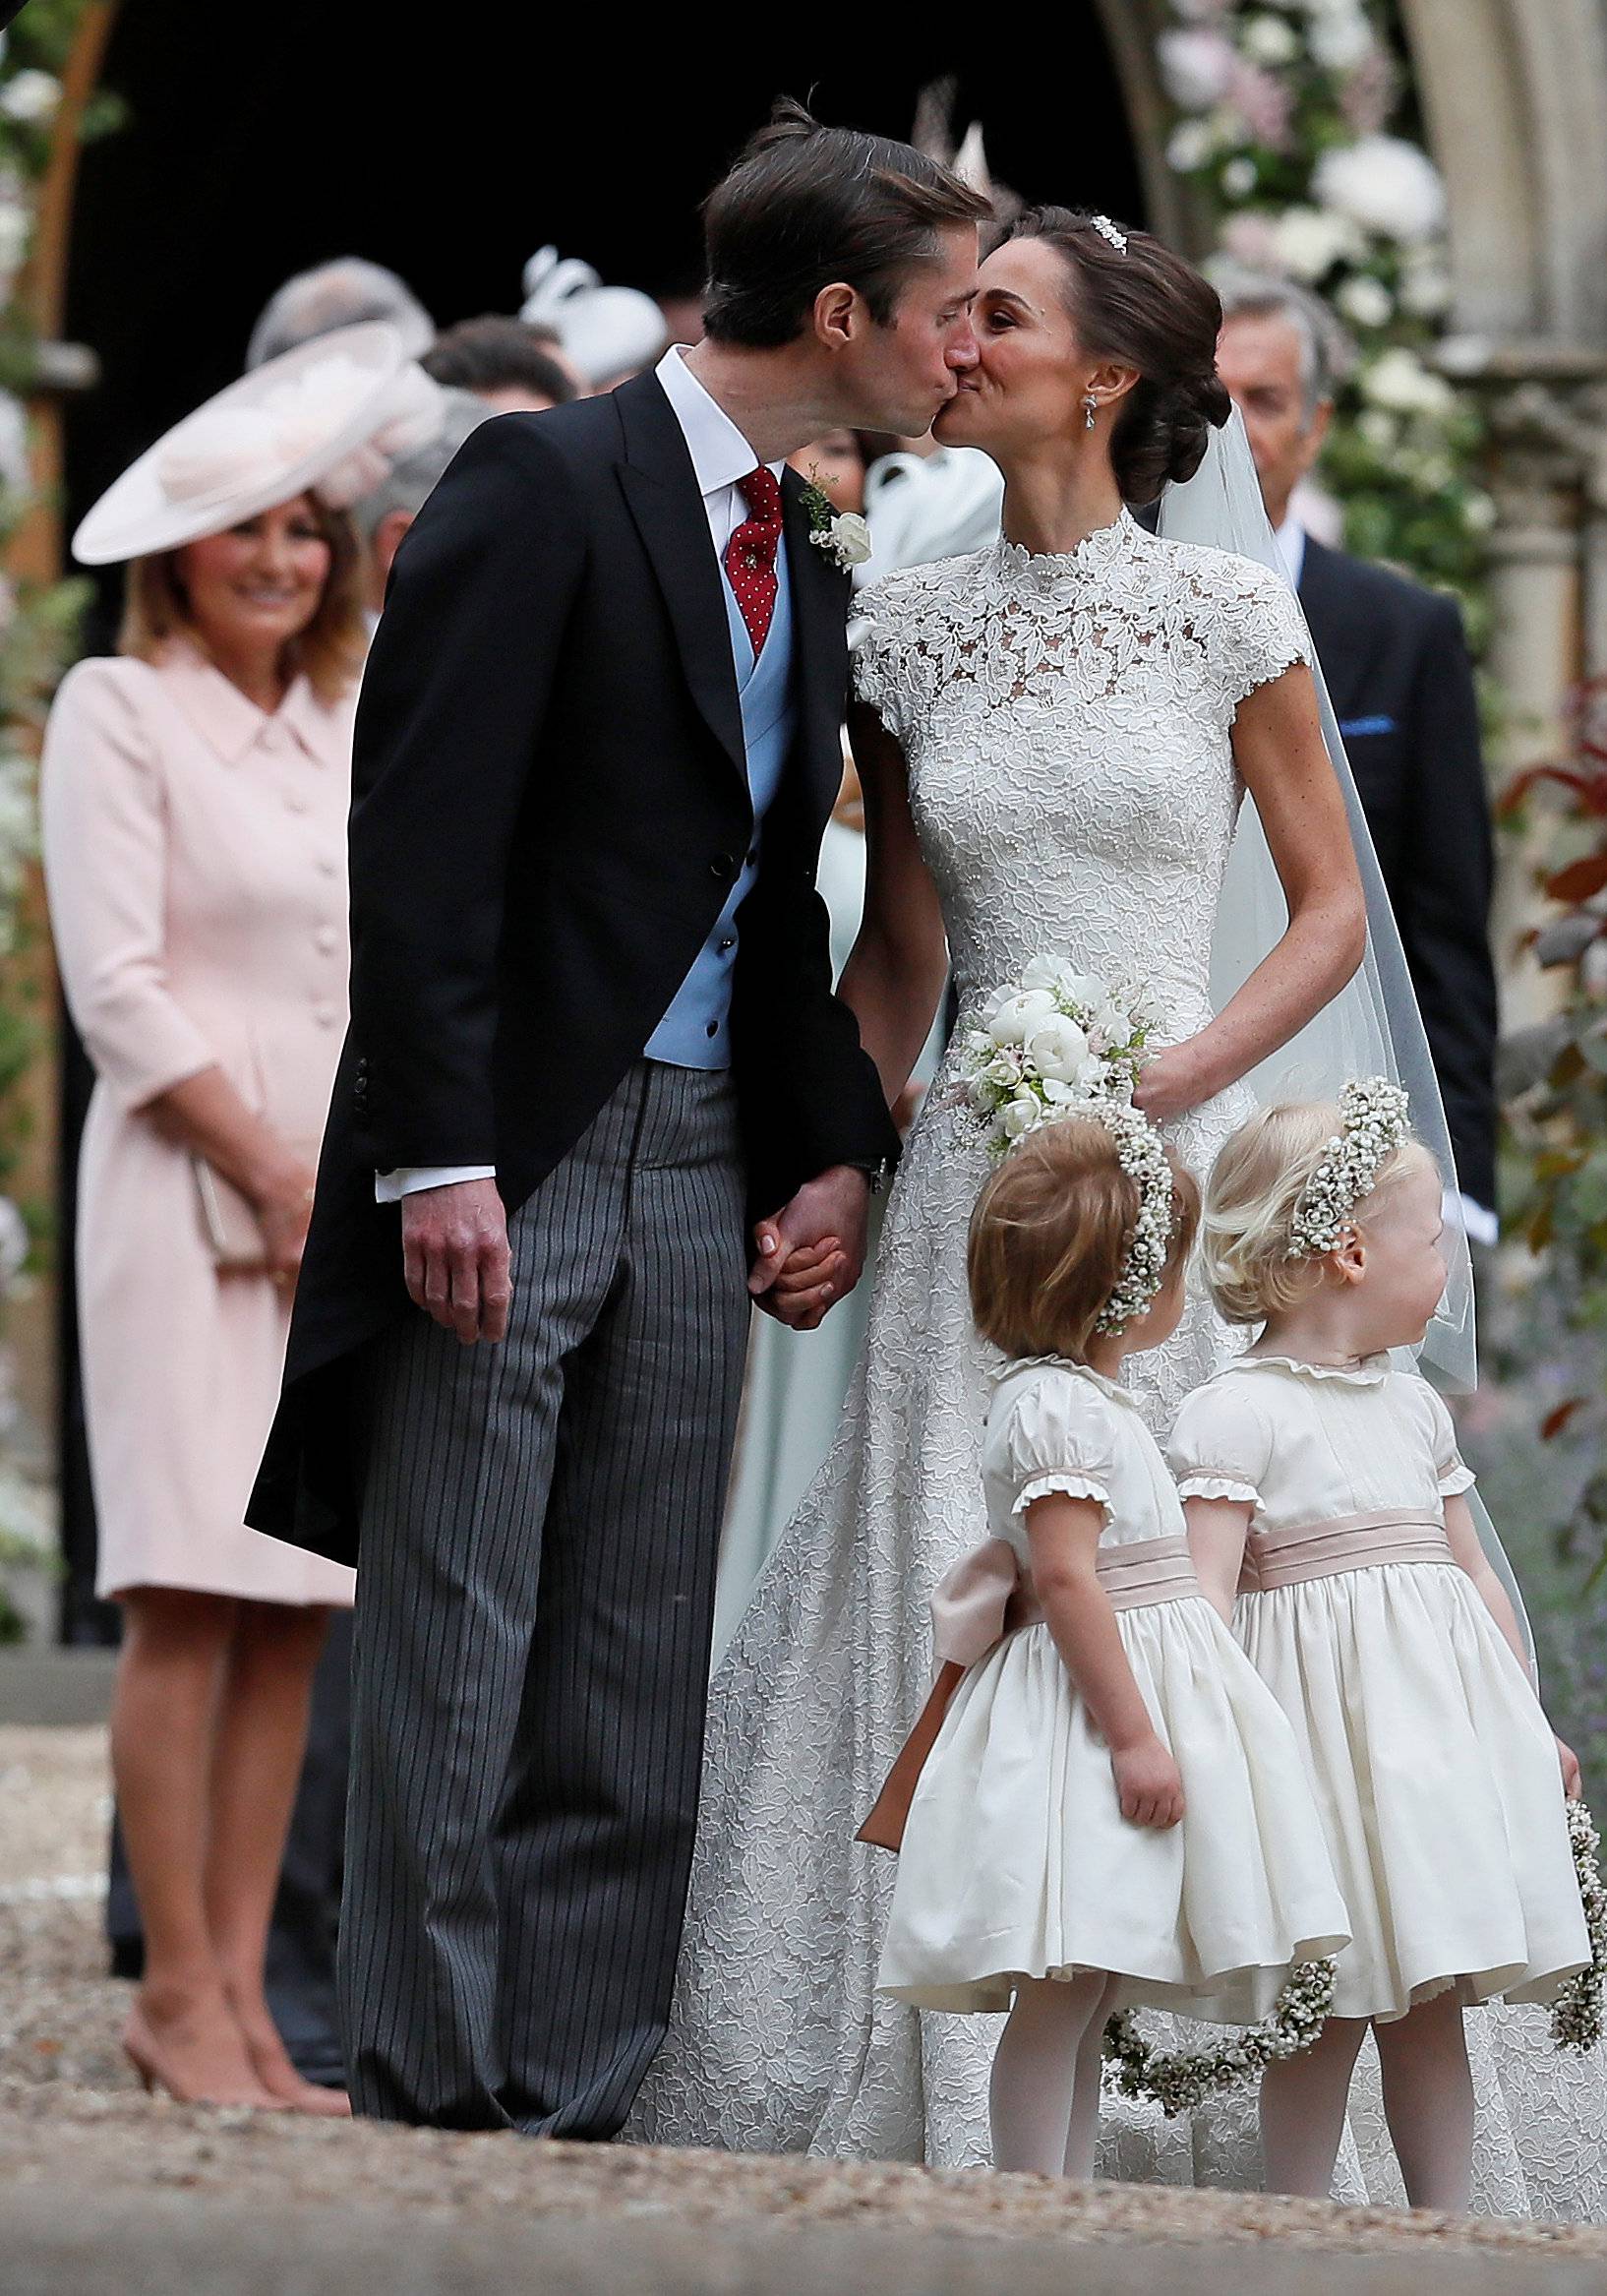 Pippa Middleton and James Matthews kiss after their wedding at St Mark's Church in Englefield